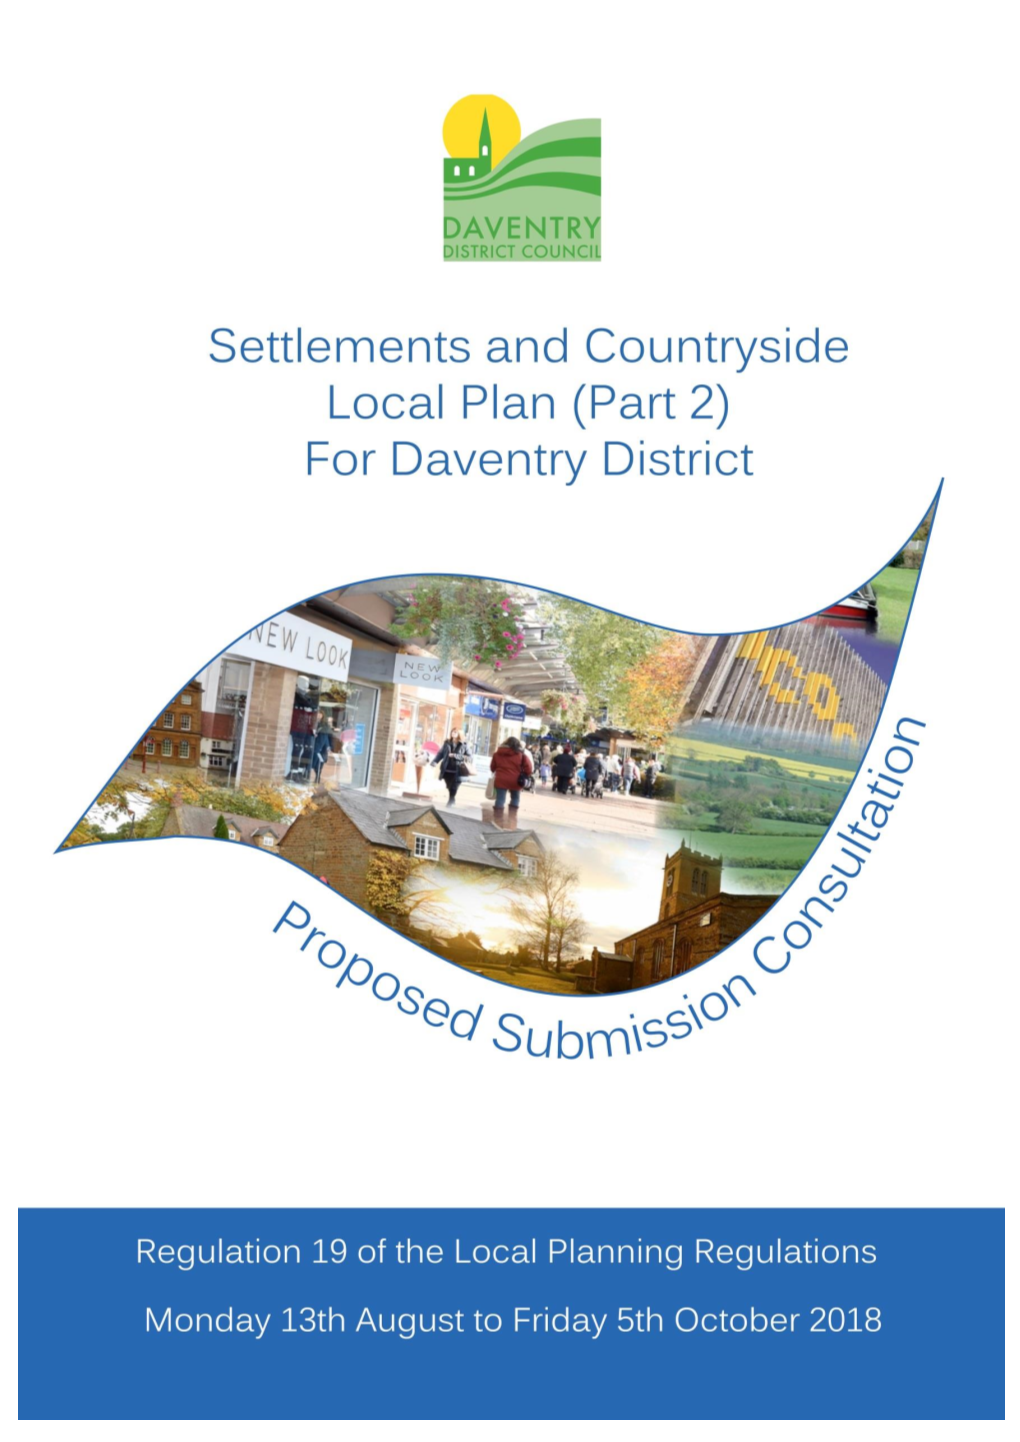 Proposed Submission Settlements and Countryside Local Plan Part 2